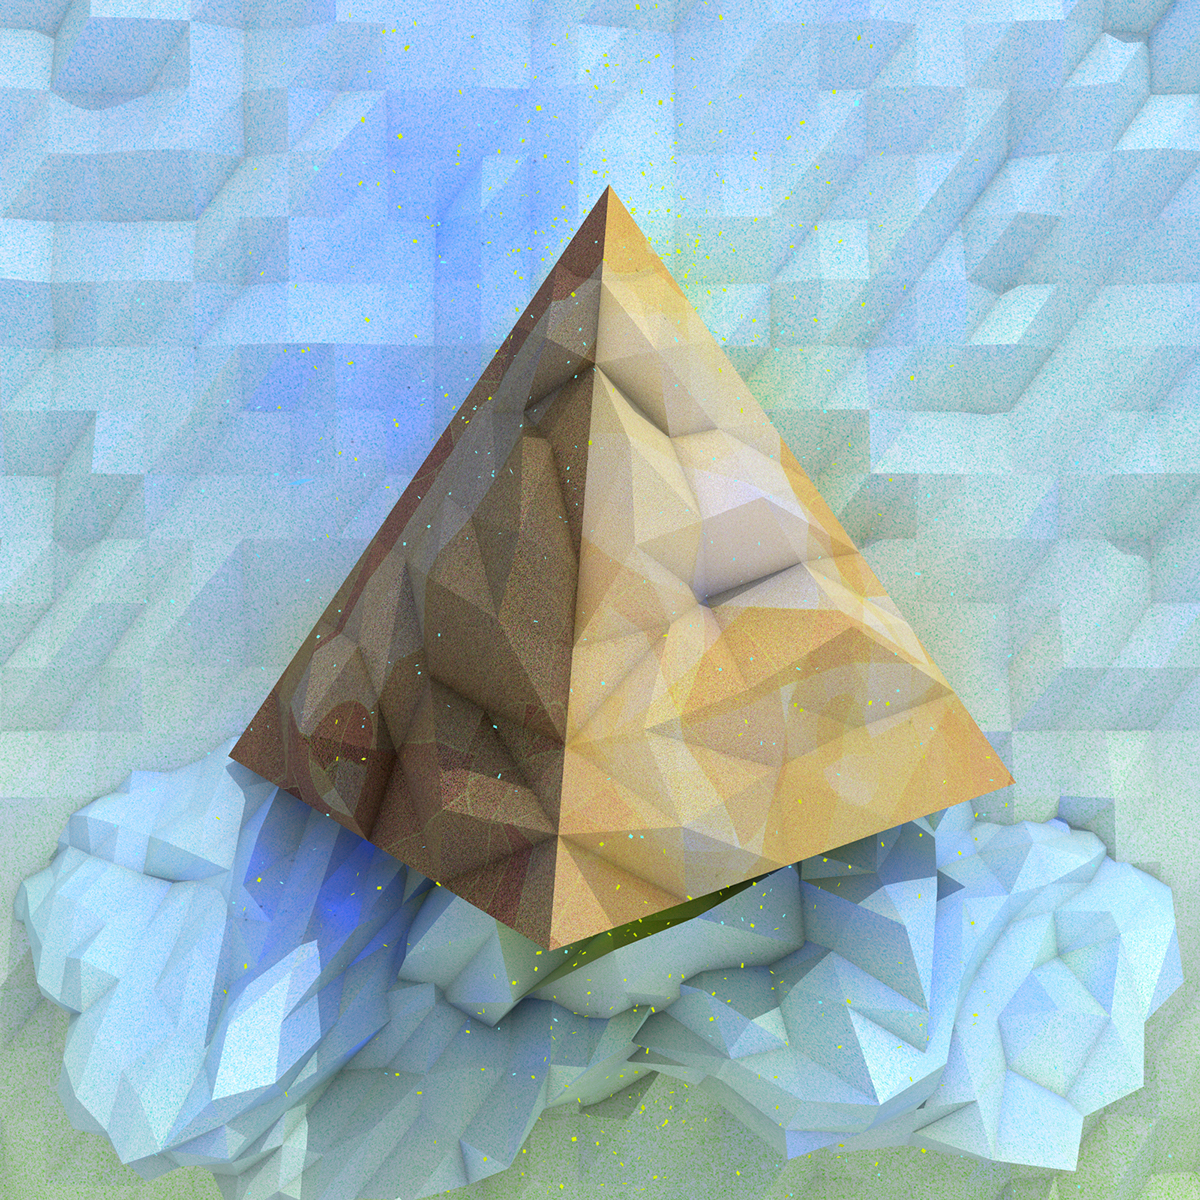 chordashian Single cover pyramid 3D Skyscraper Souls indie dance keep on questions lowpoly geometric triangle inspire